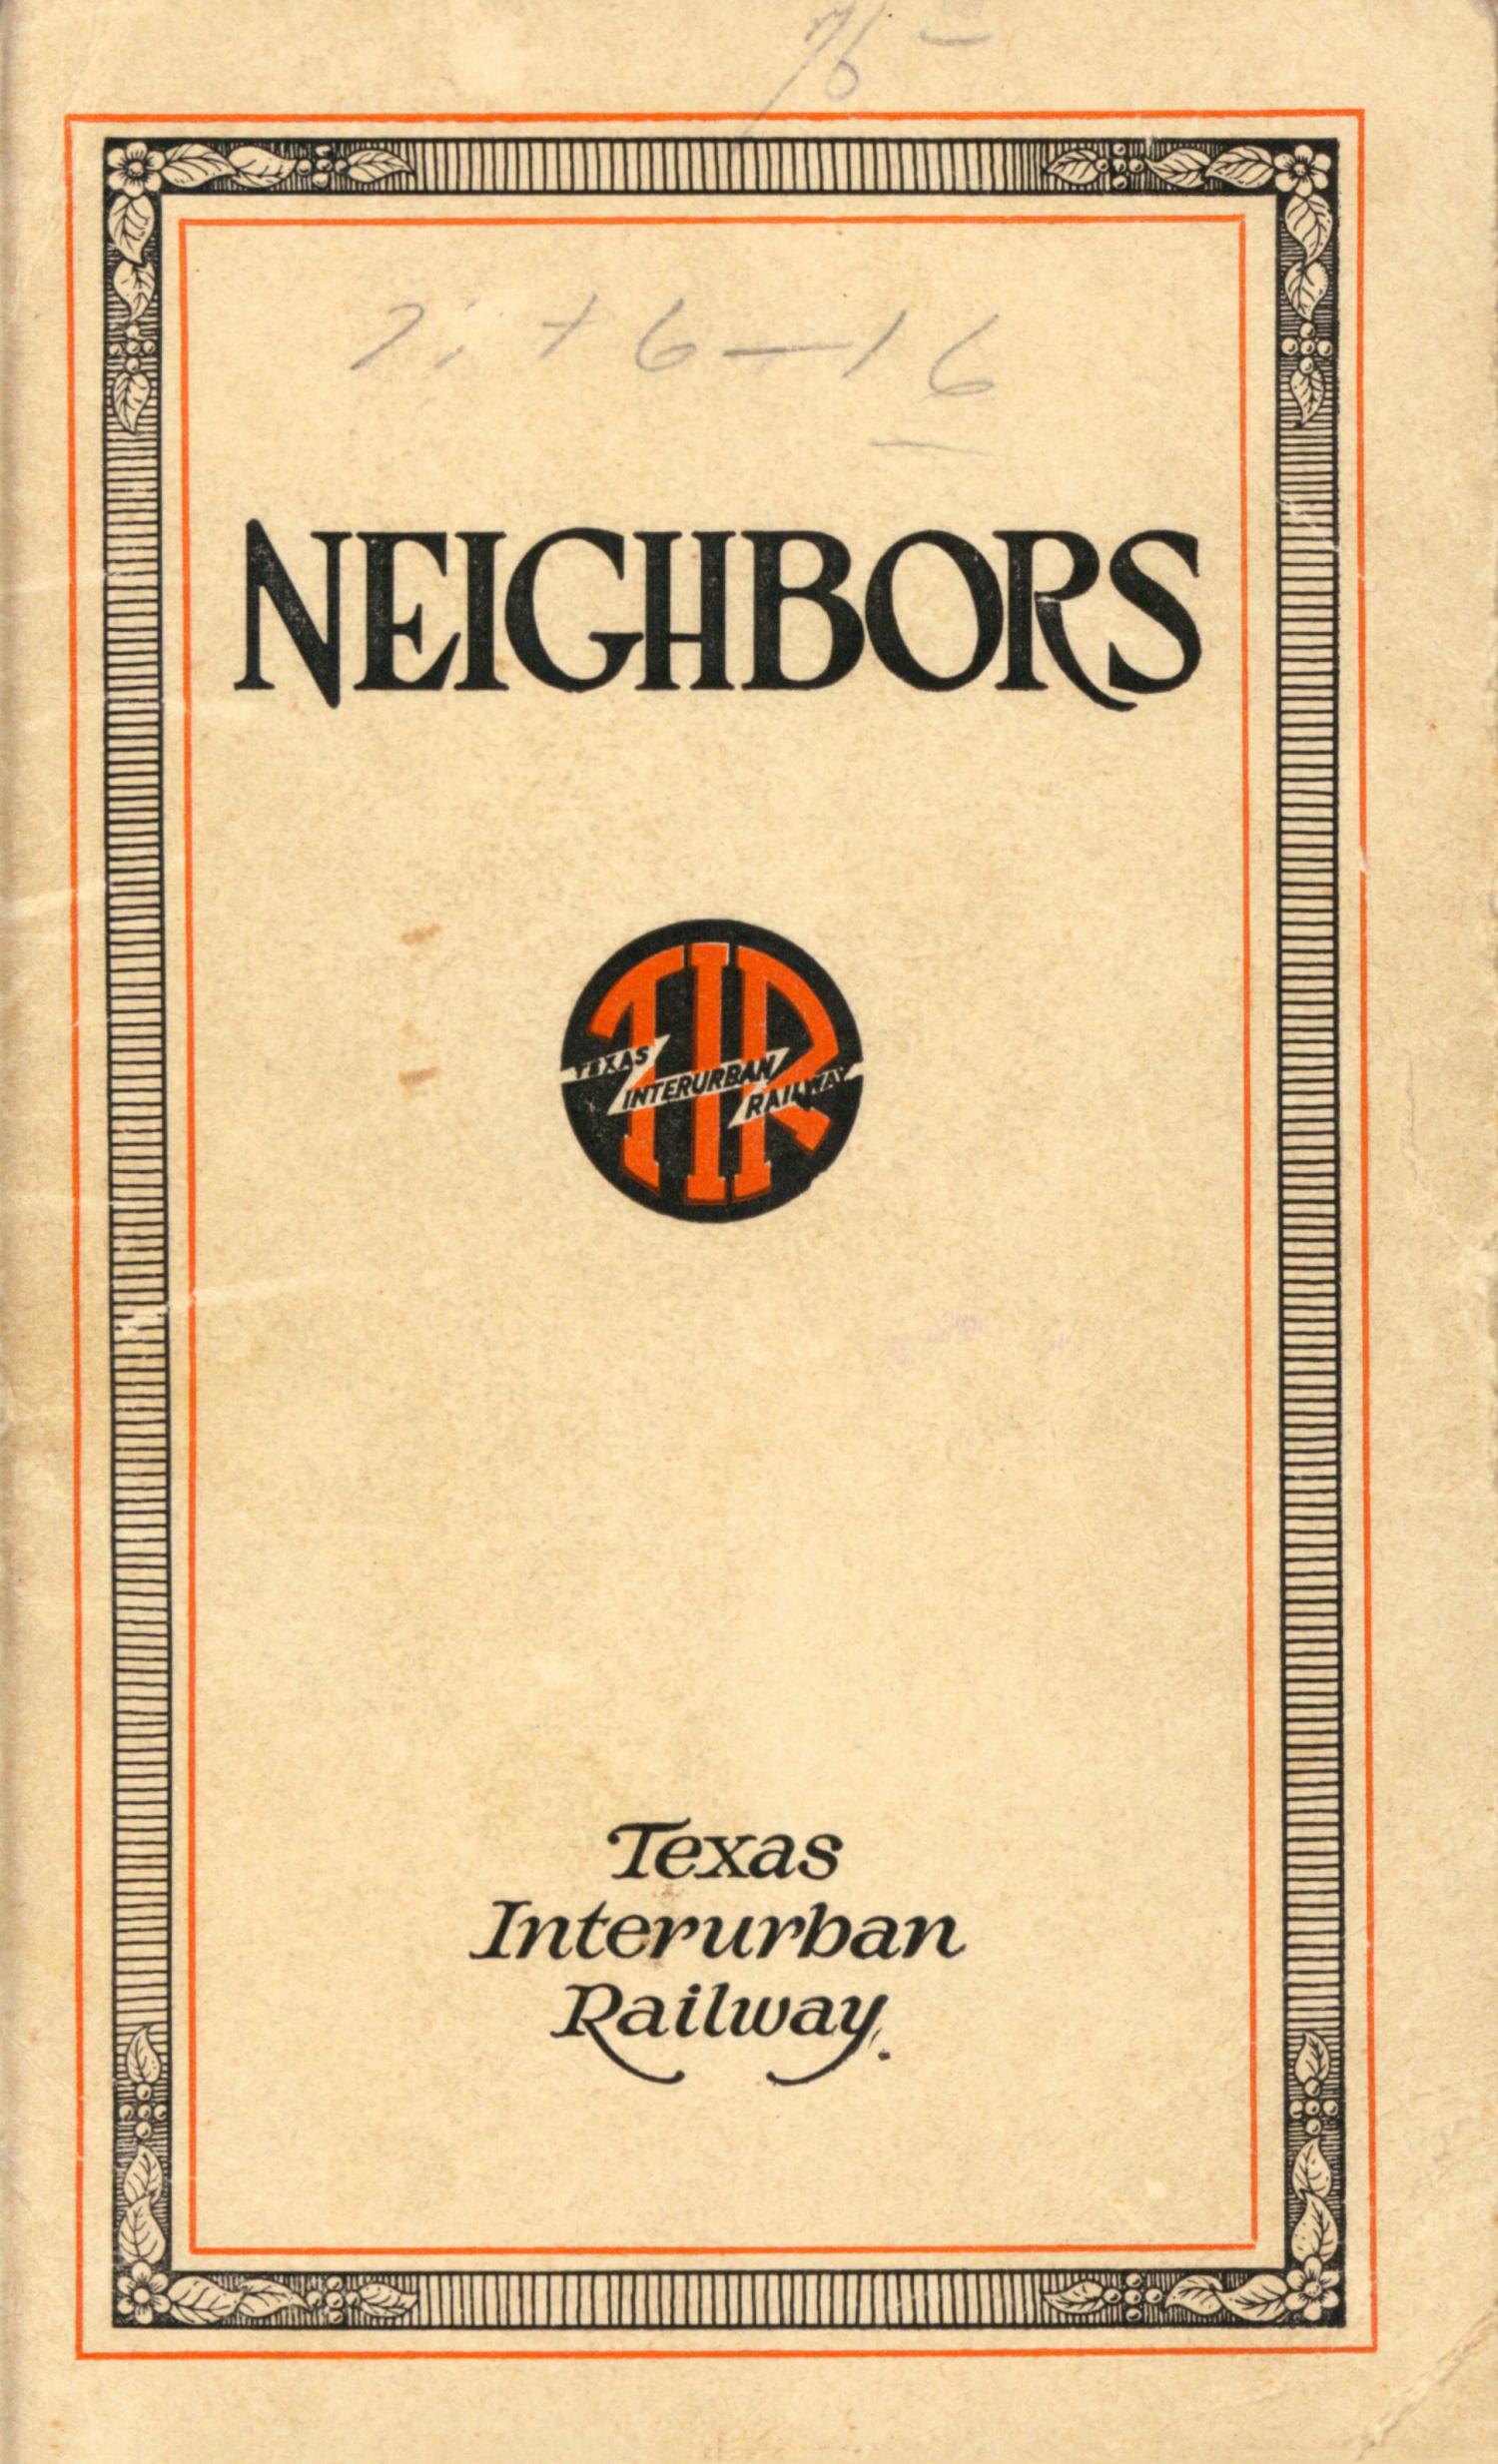 Making Neighbors of the people of Dallas and Kaufman counties and the towns of Terrell, Forney, Mesquite and Dallas by the opening of the Texas Interurban Railway
                                                
                                                    Front Cover
                                                